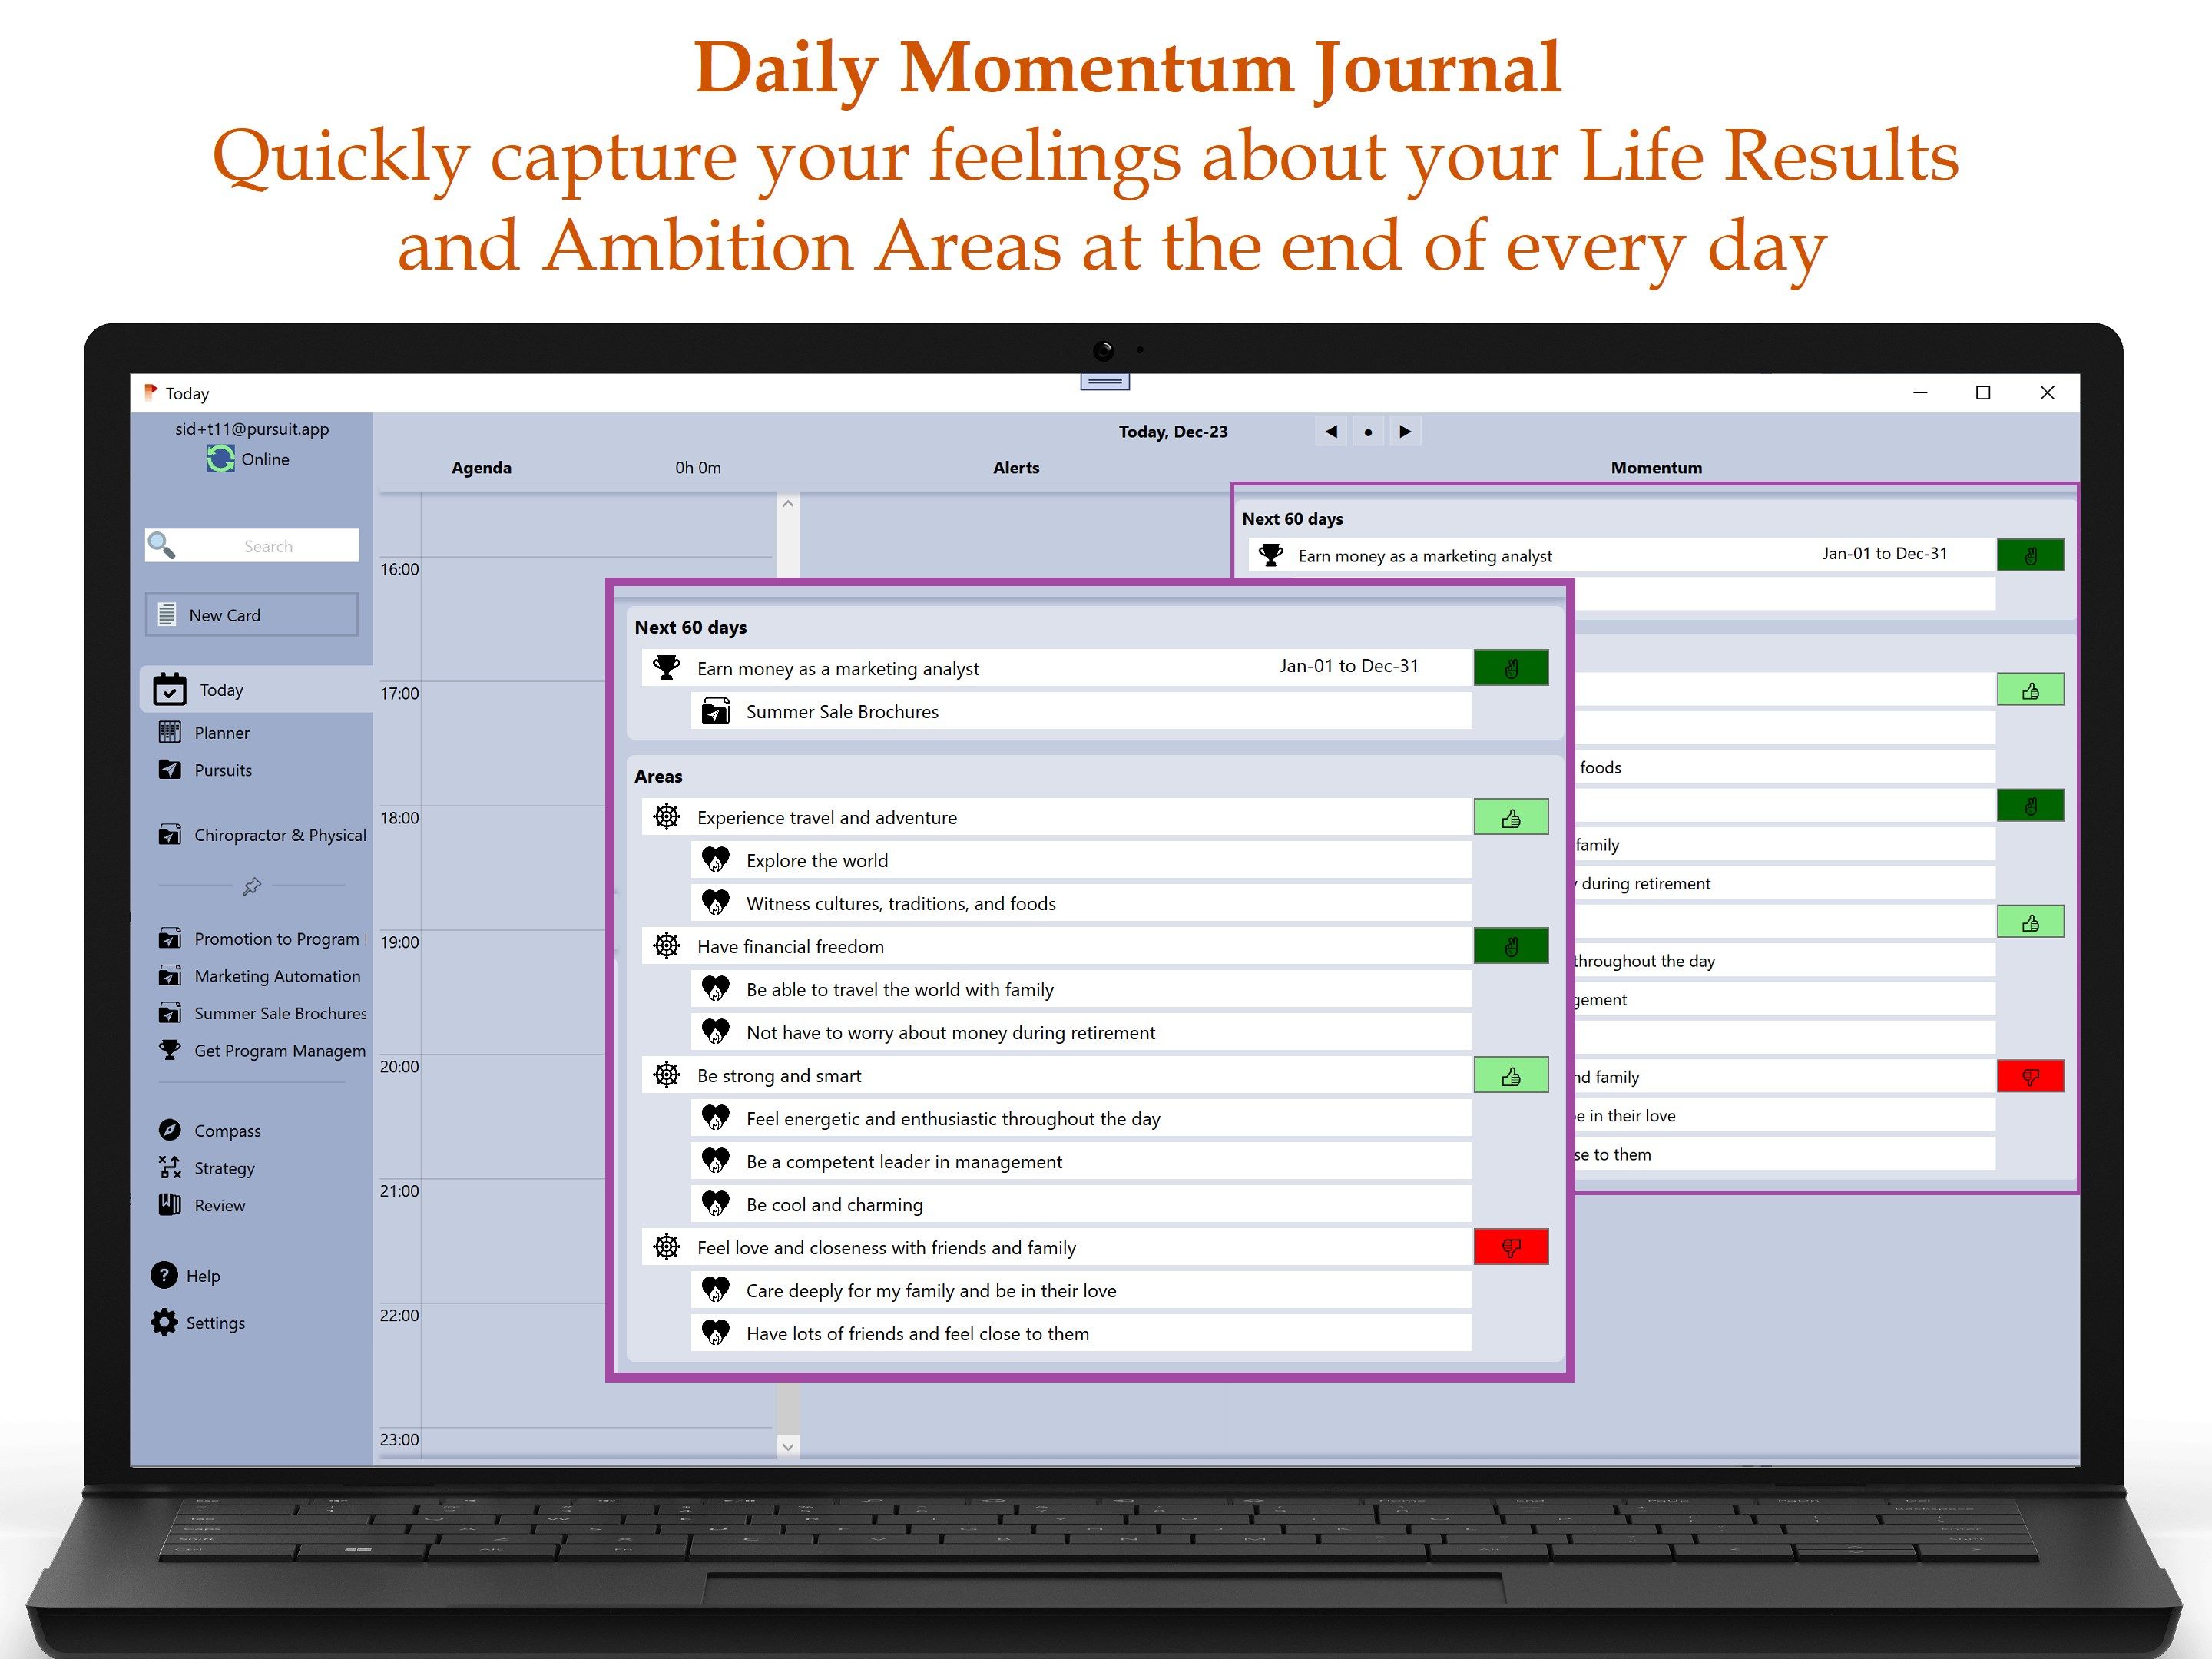 Daily Momentum Journal: Quickly capture your feelings about your Life Results and Ambition Areas at the end of every day